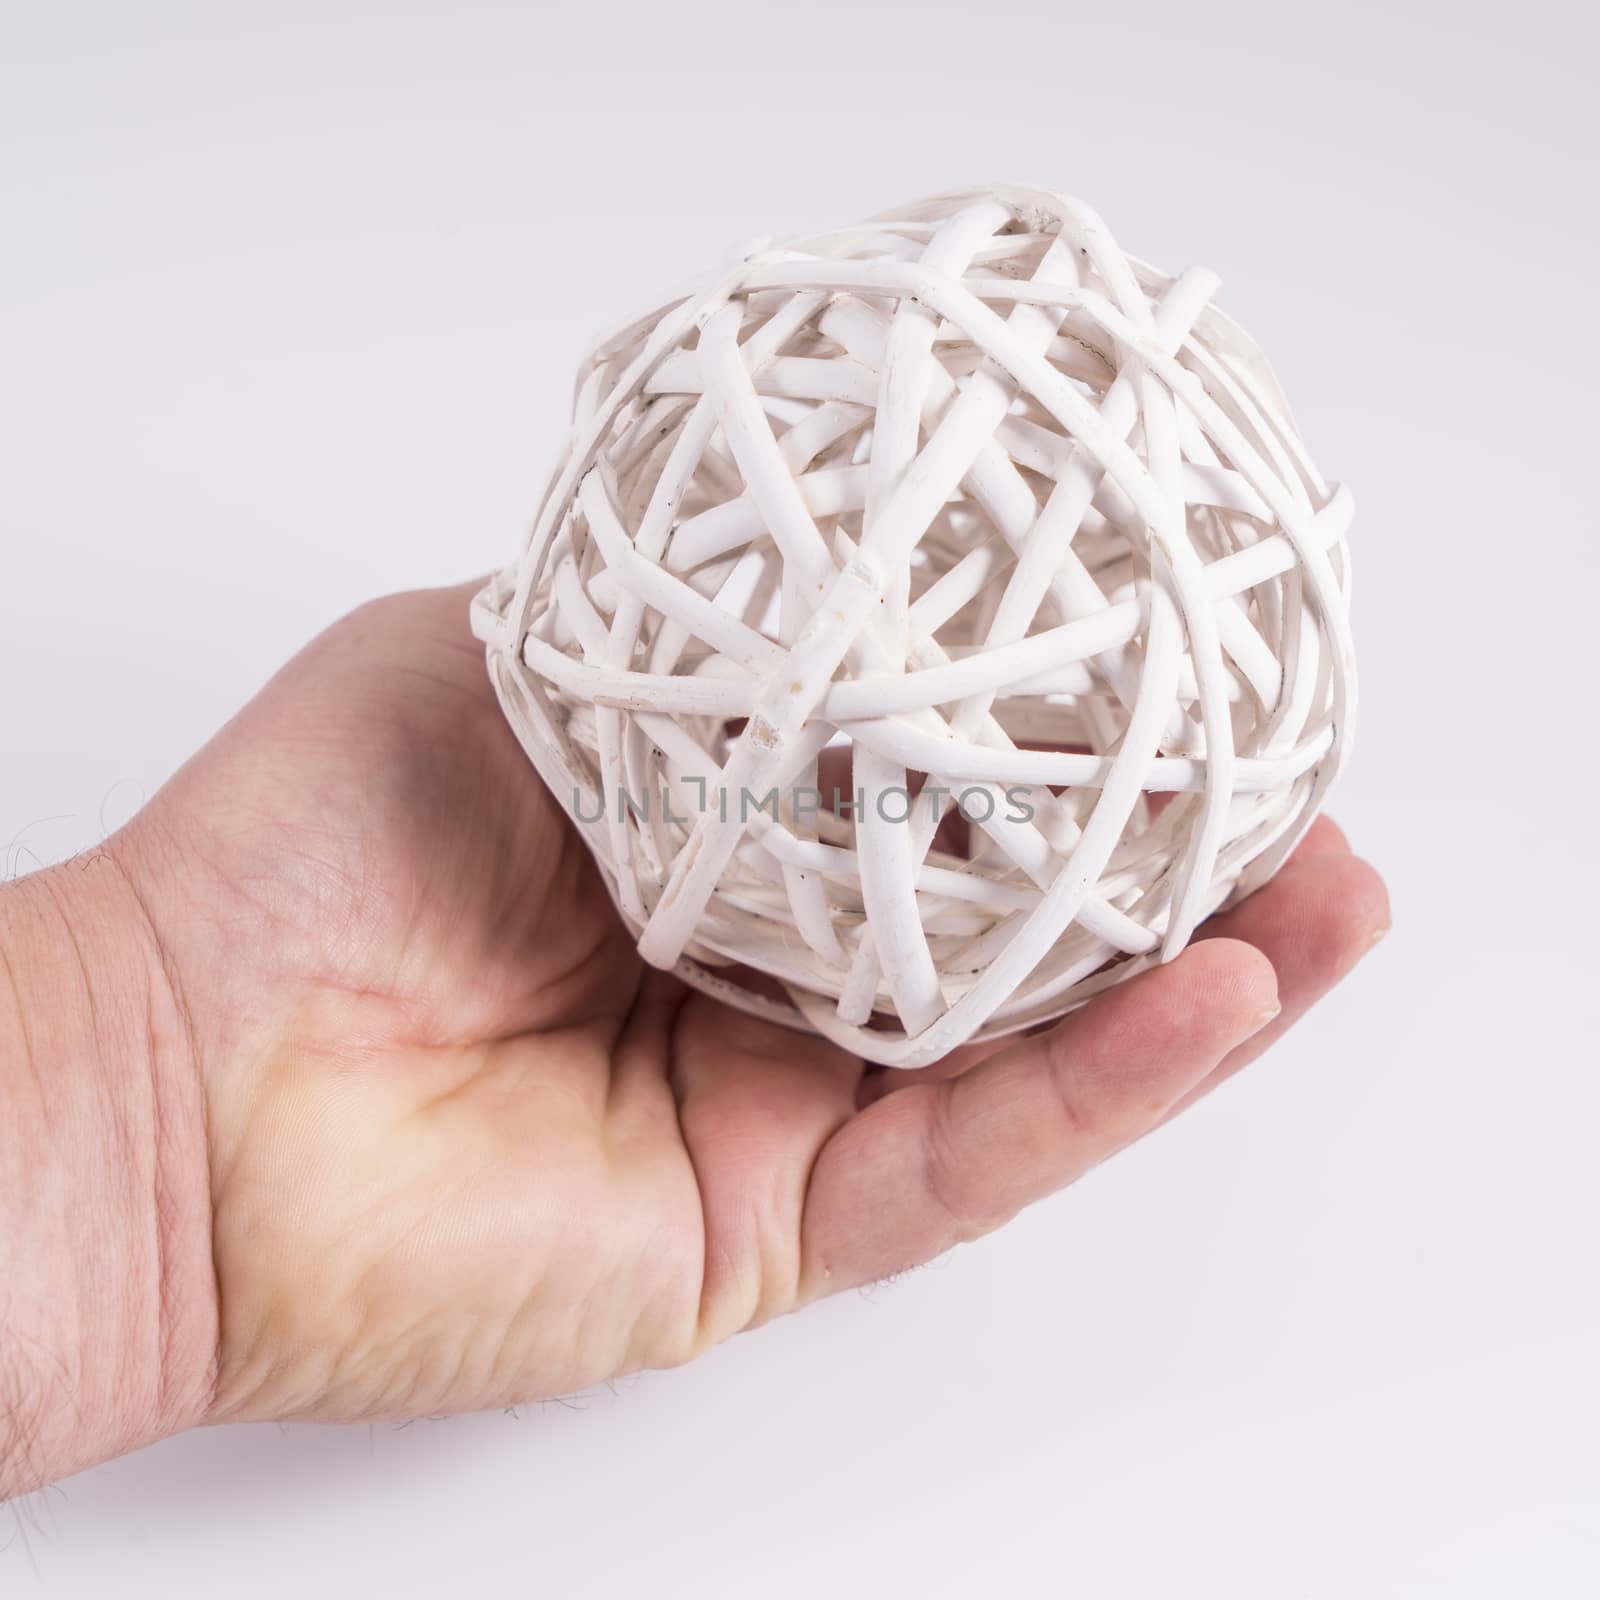 A ball made with white wooden slats on the hand